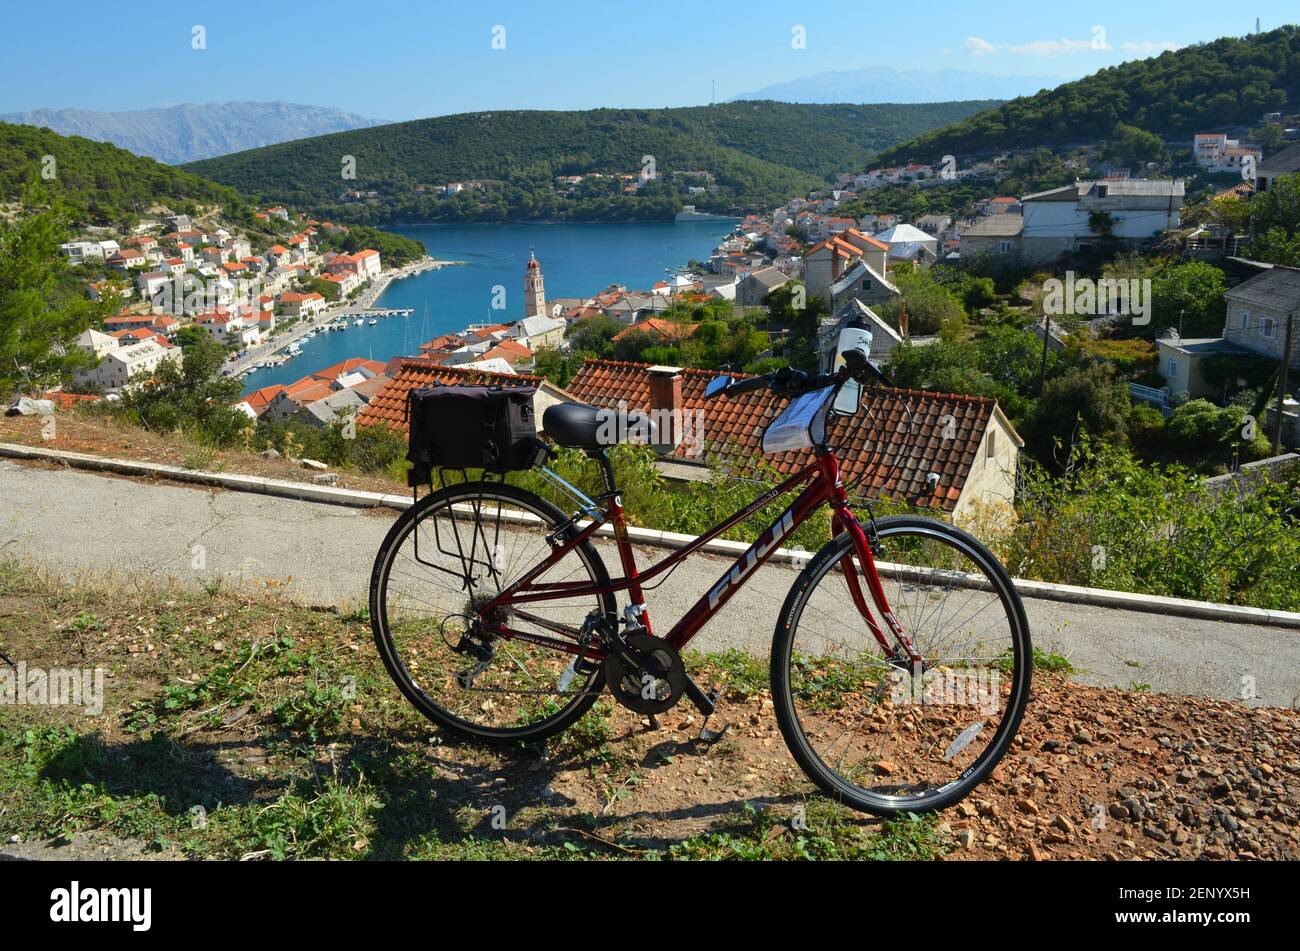 Beautiful blue water of the Adriatic sea, Bicycle touring in the Dalmatian Islands of Croatia, town of Pucsica, Croatian. Stock Photo